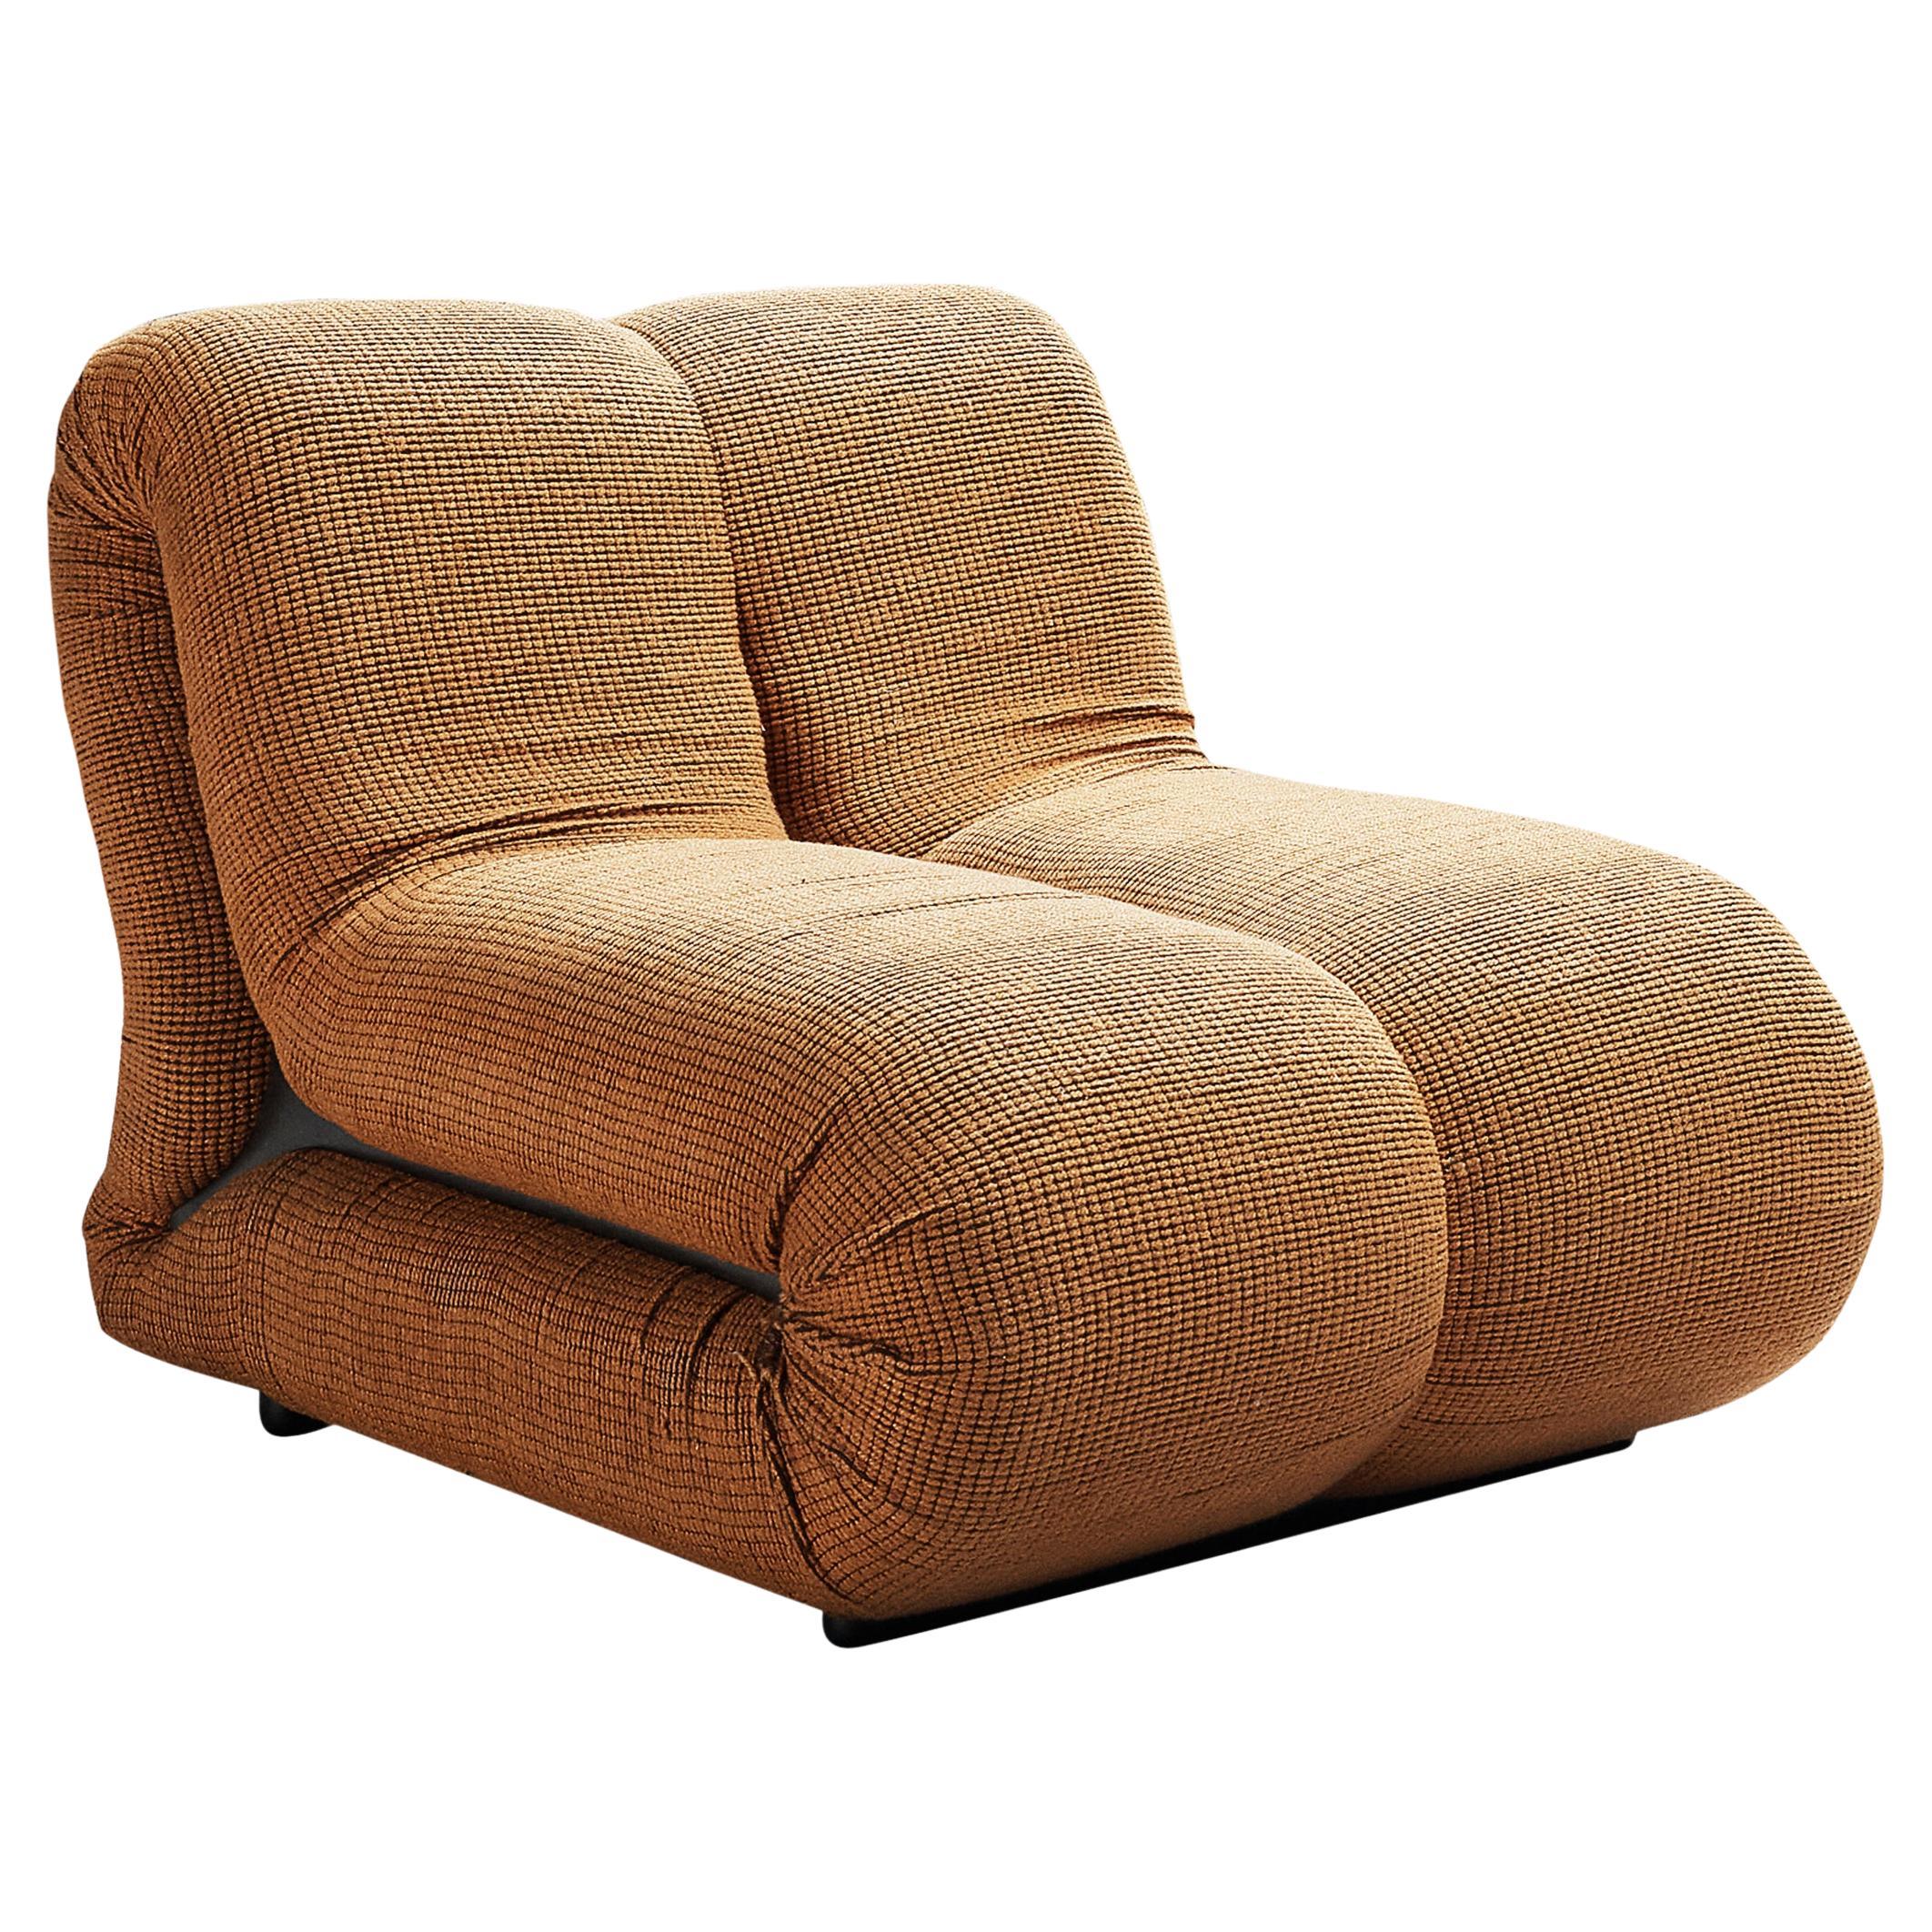 Claudio Vagnoni for 1P 'Pagru' Lounge Chair in Camel Upholstery